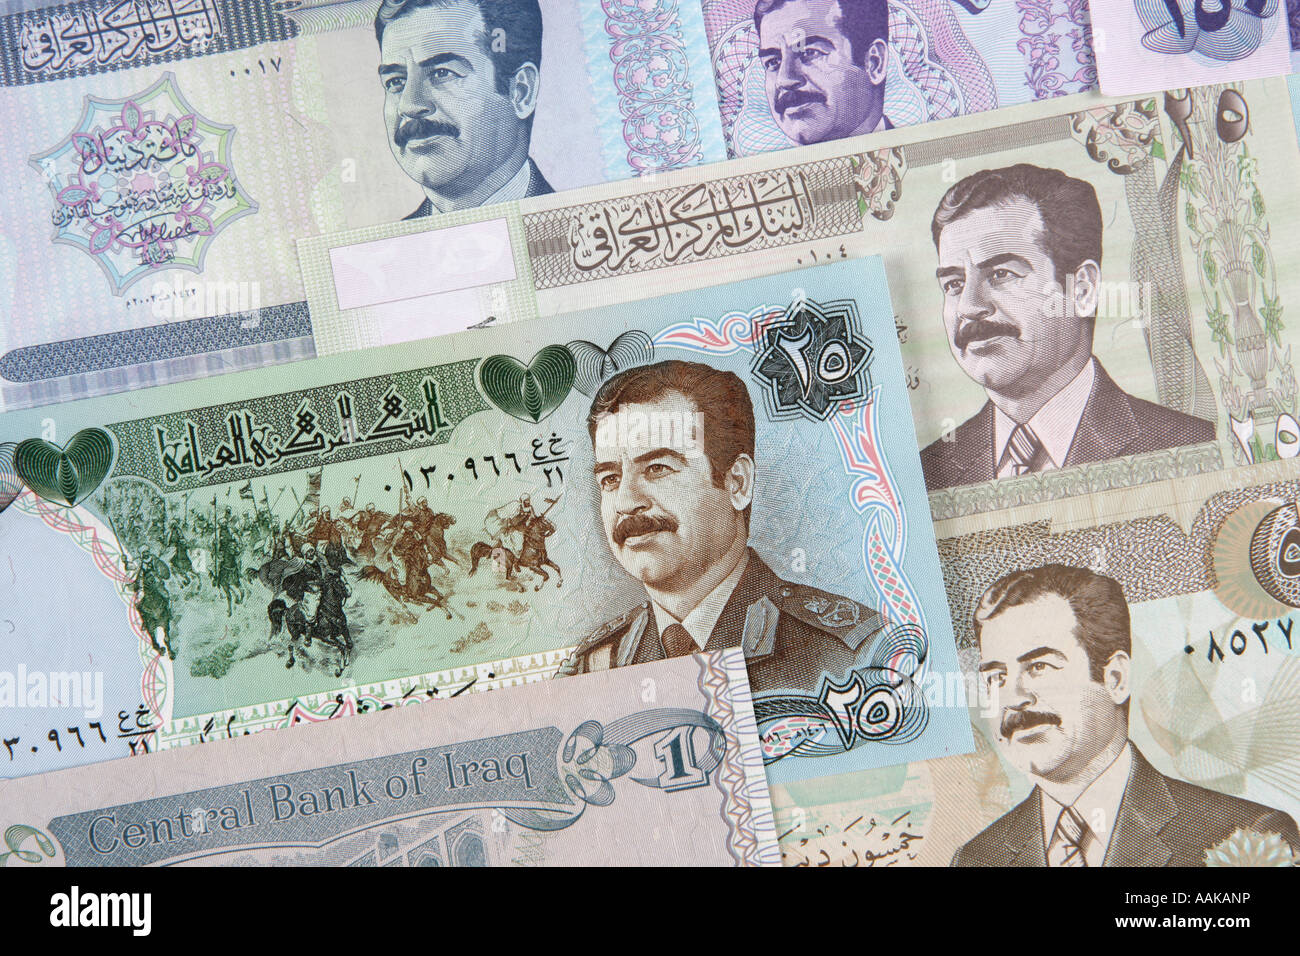 Various paper money Dinar notes from Iraq These bills are from the former regime run by the dictator Suddam Hussein Stock Photo